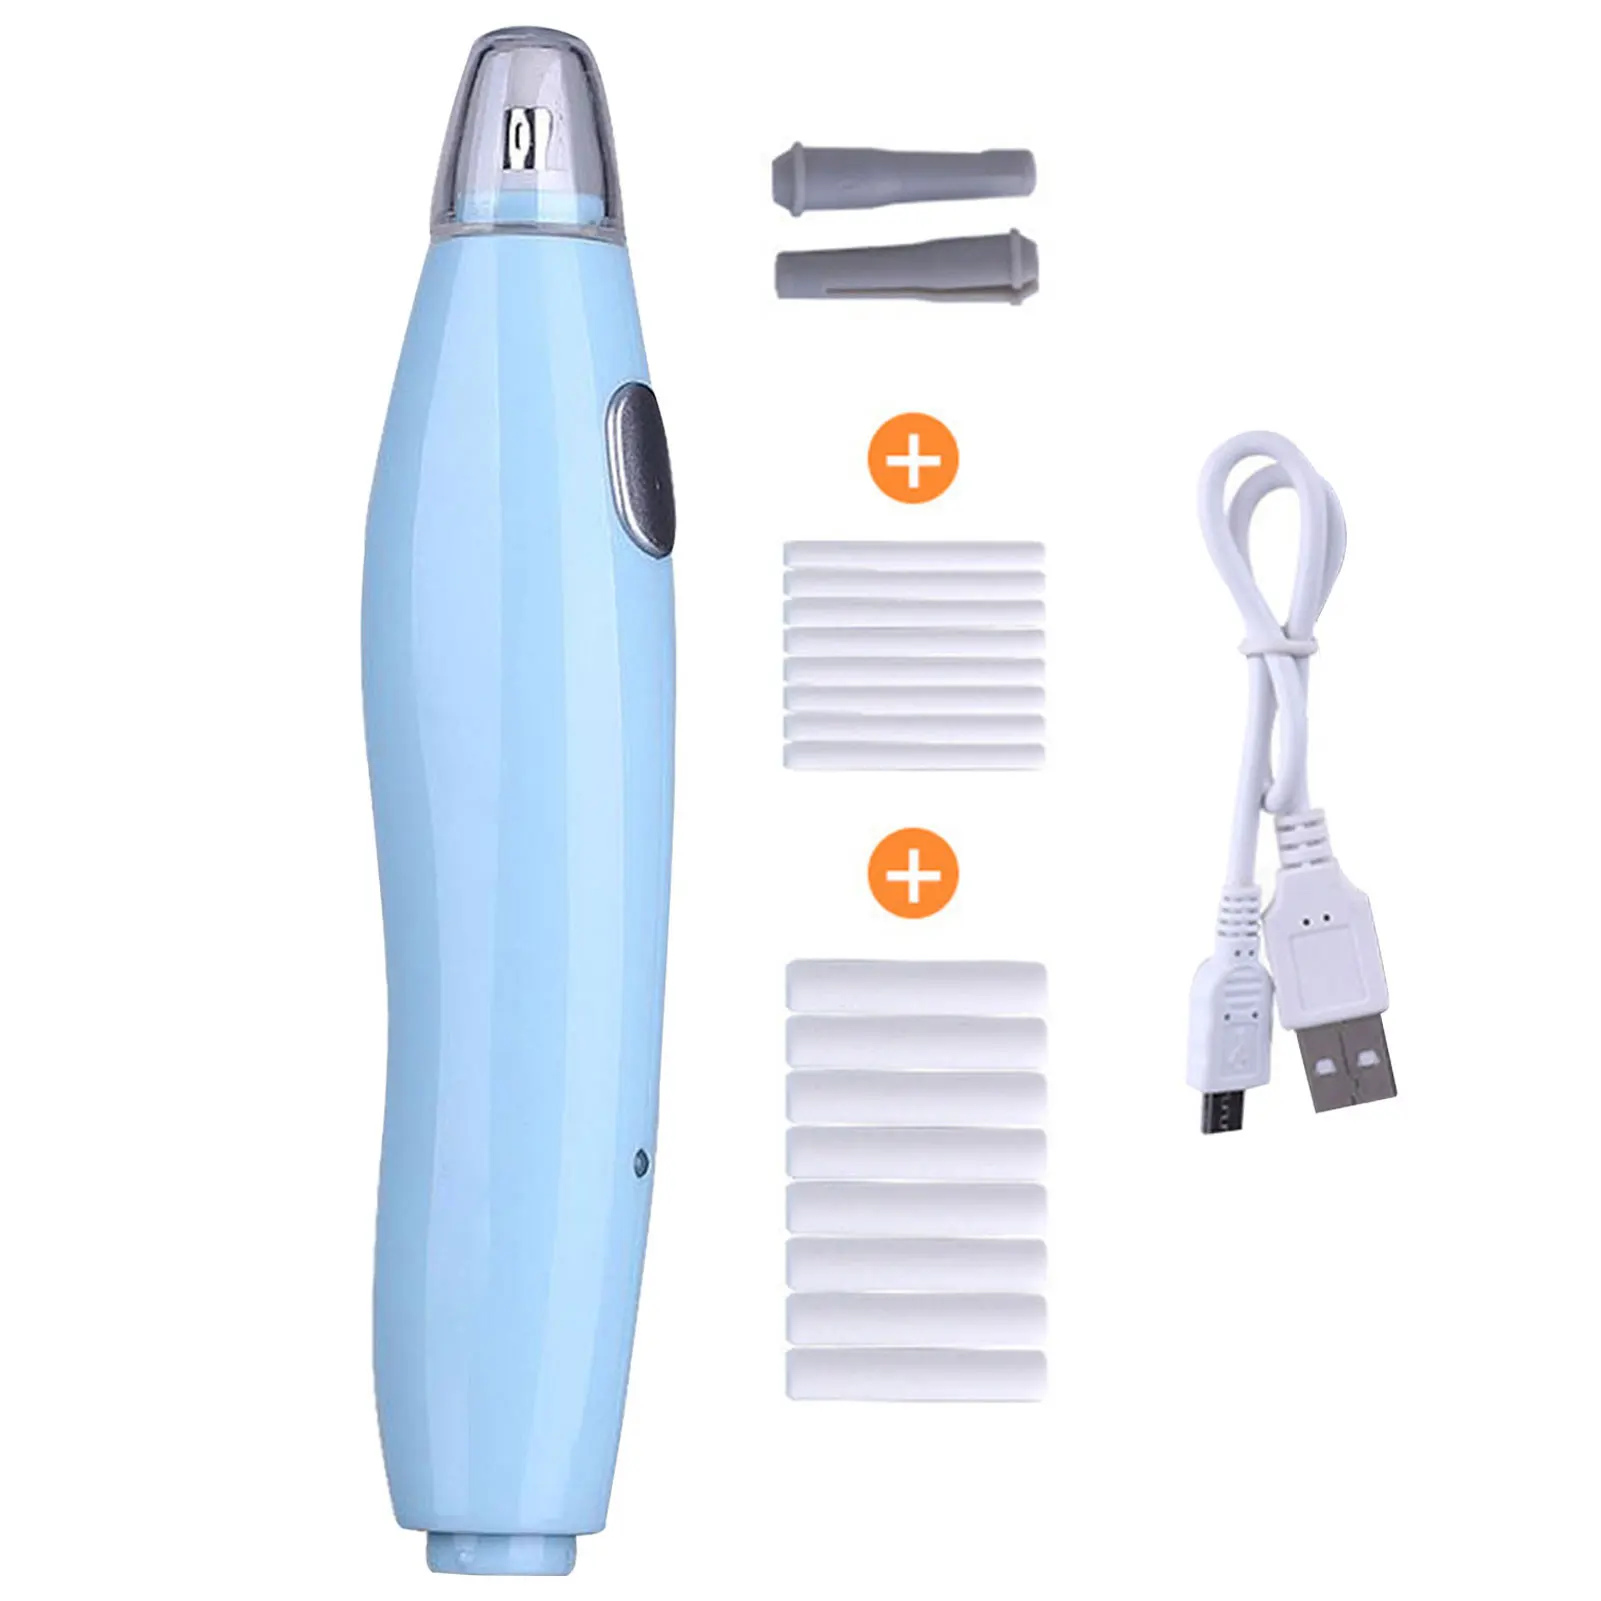 

Electric Eraser For School Office For Sketch Writing Drawing Rechargeable Battery Powered Electric Eraser Students Stationery